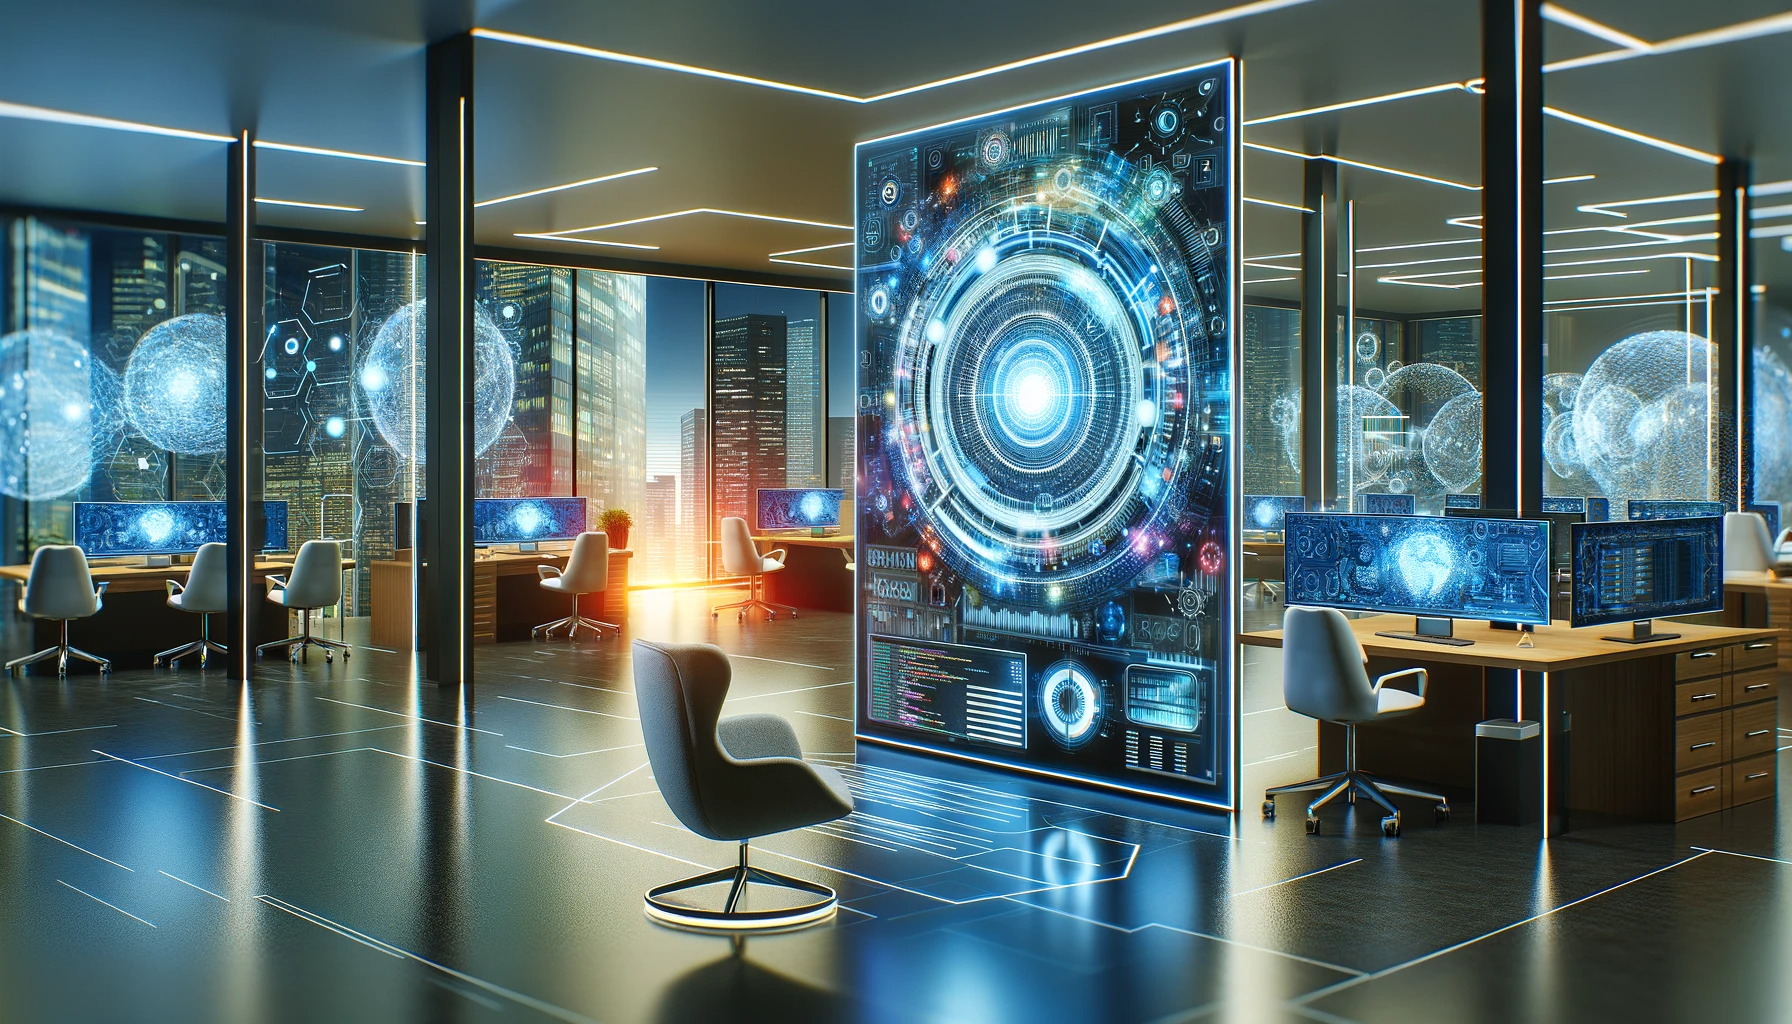 A futuristic workspace with advanced AI and blockchain technology, featuring screens displaying complex code and digital interfaces, amidst a modern, sleek office environment. The setting is vibrant yet professional, embodying the cutting-edge nature of AI and blockchain development.